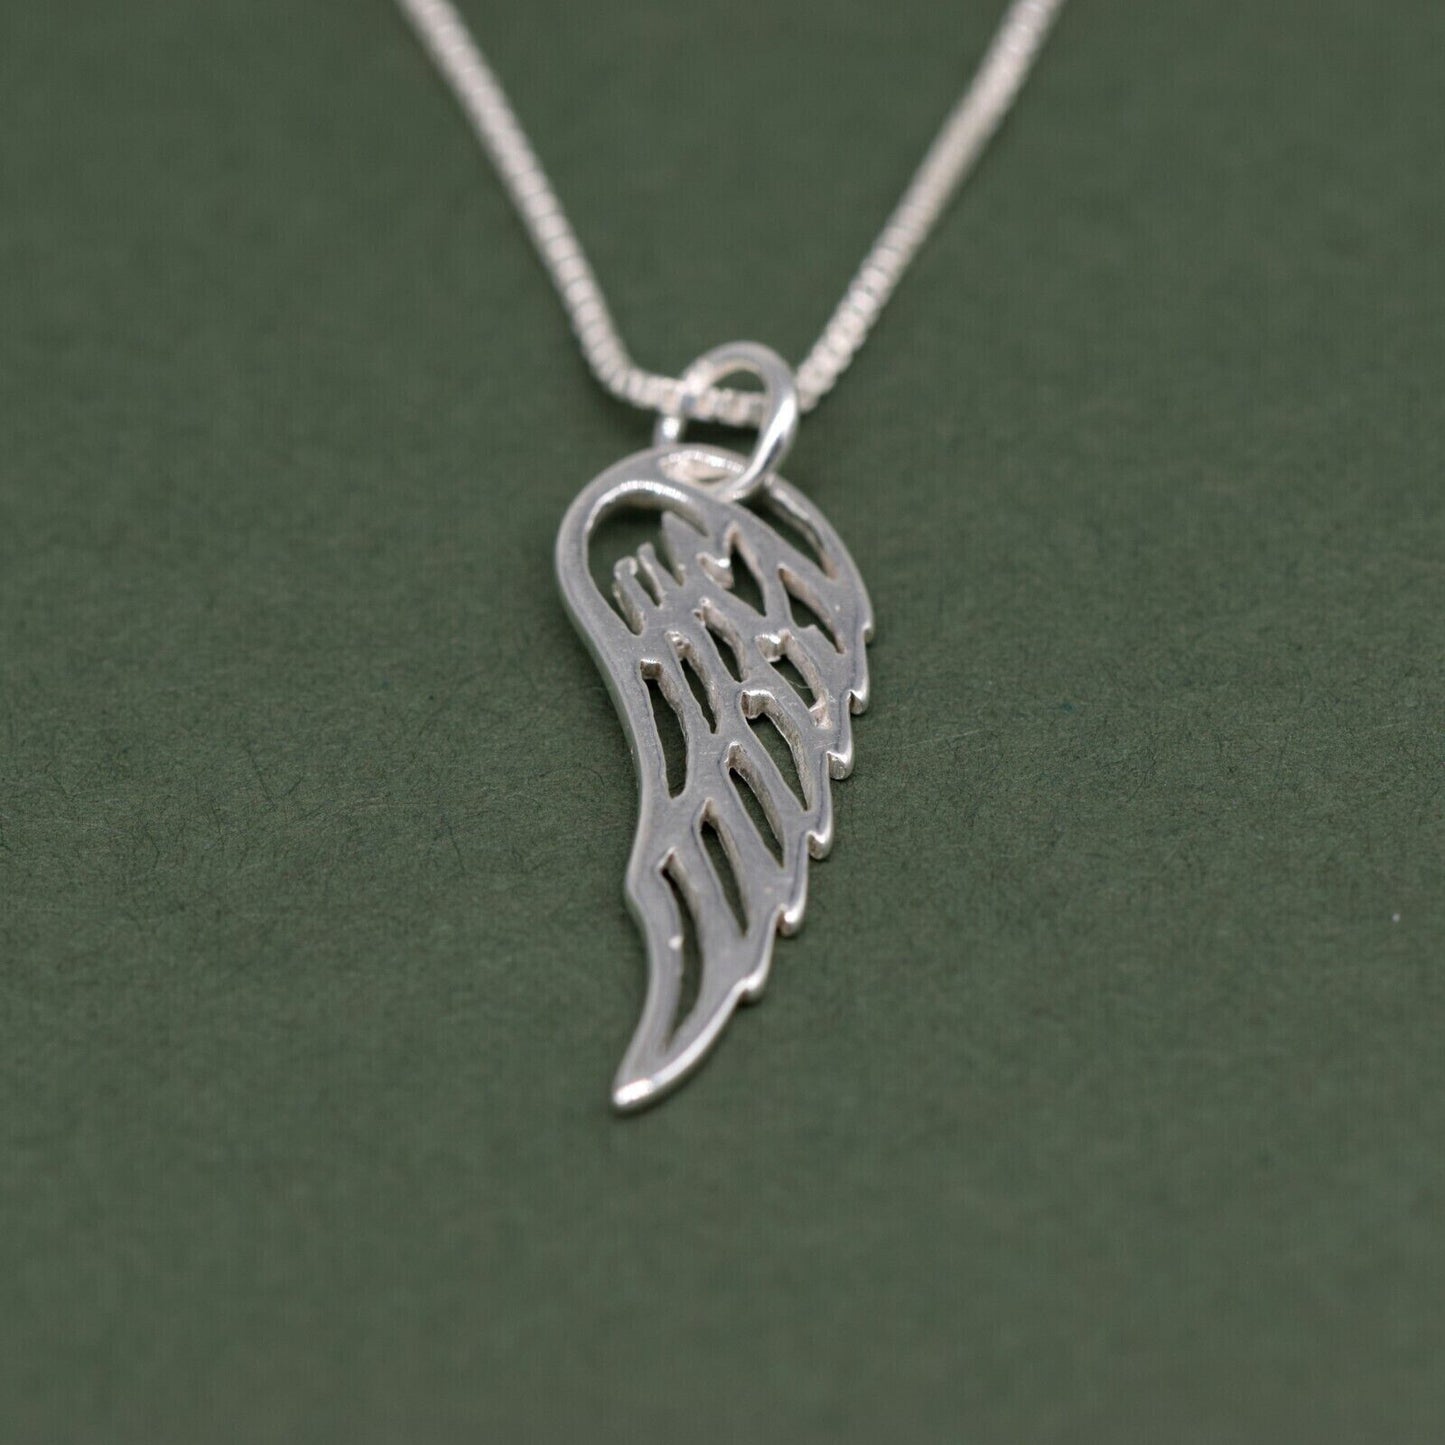 Genuine 925 Sterling Silver Wing Pendant Necklace on 14”-24" Box Chain